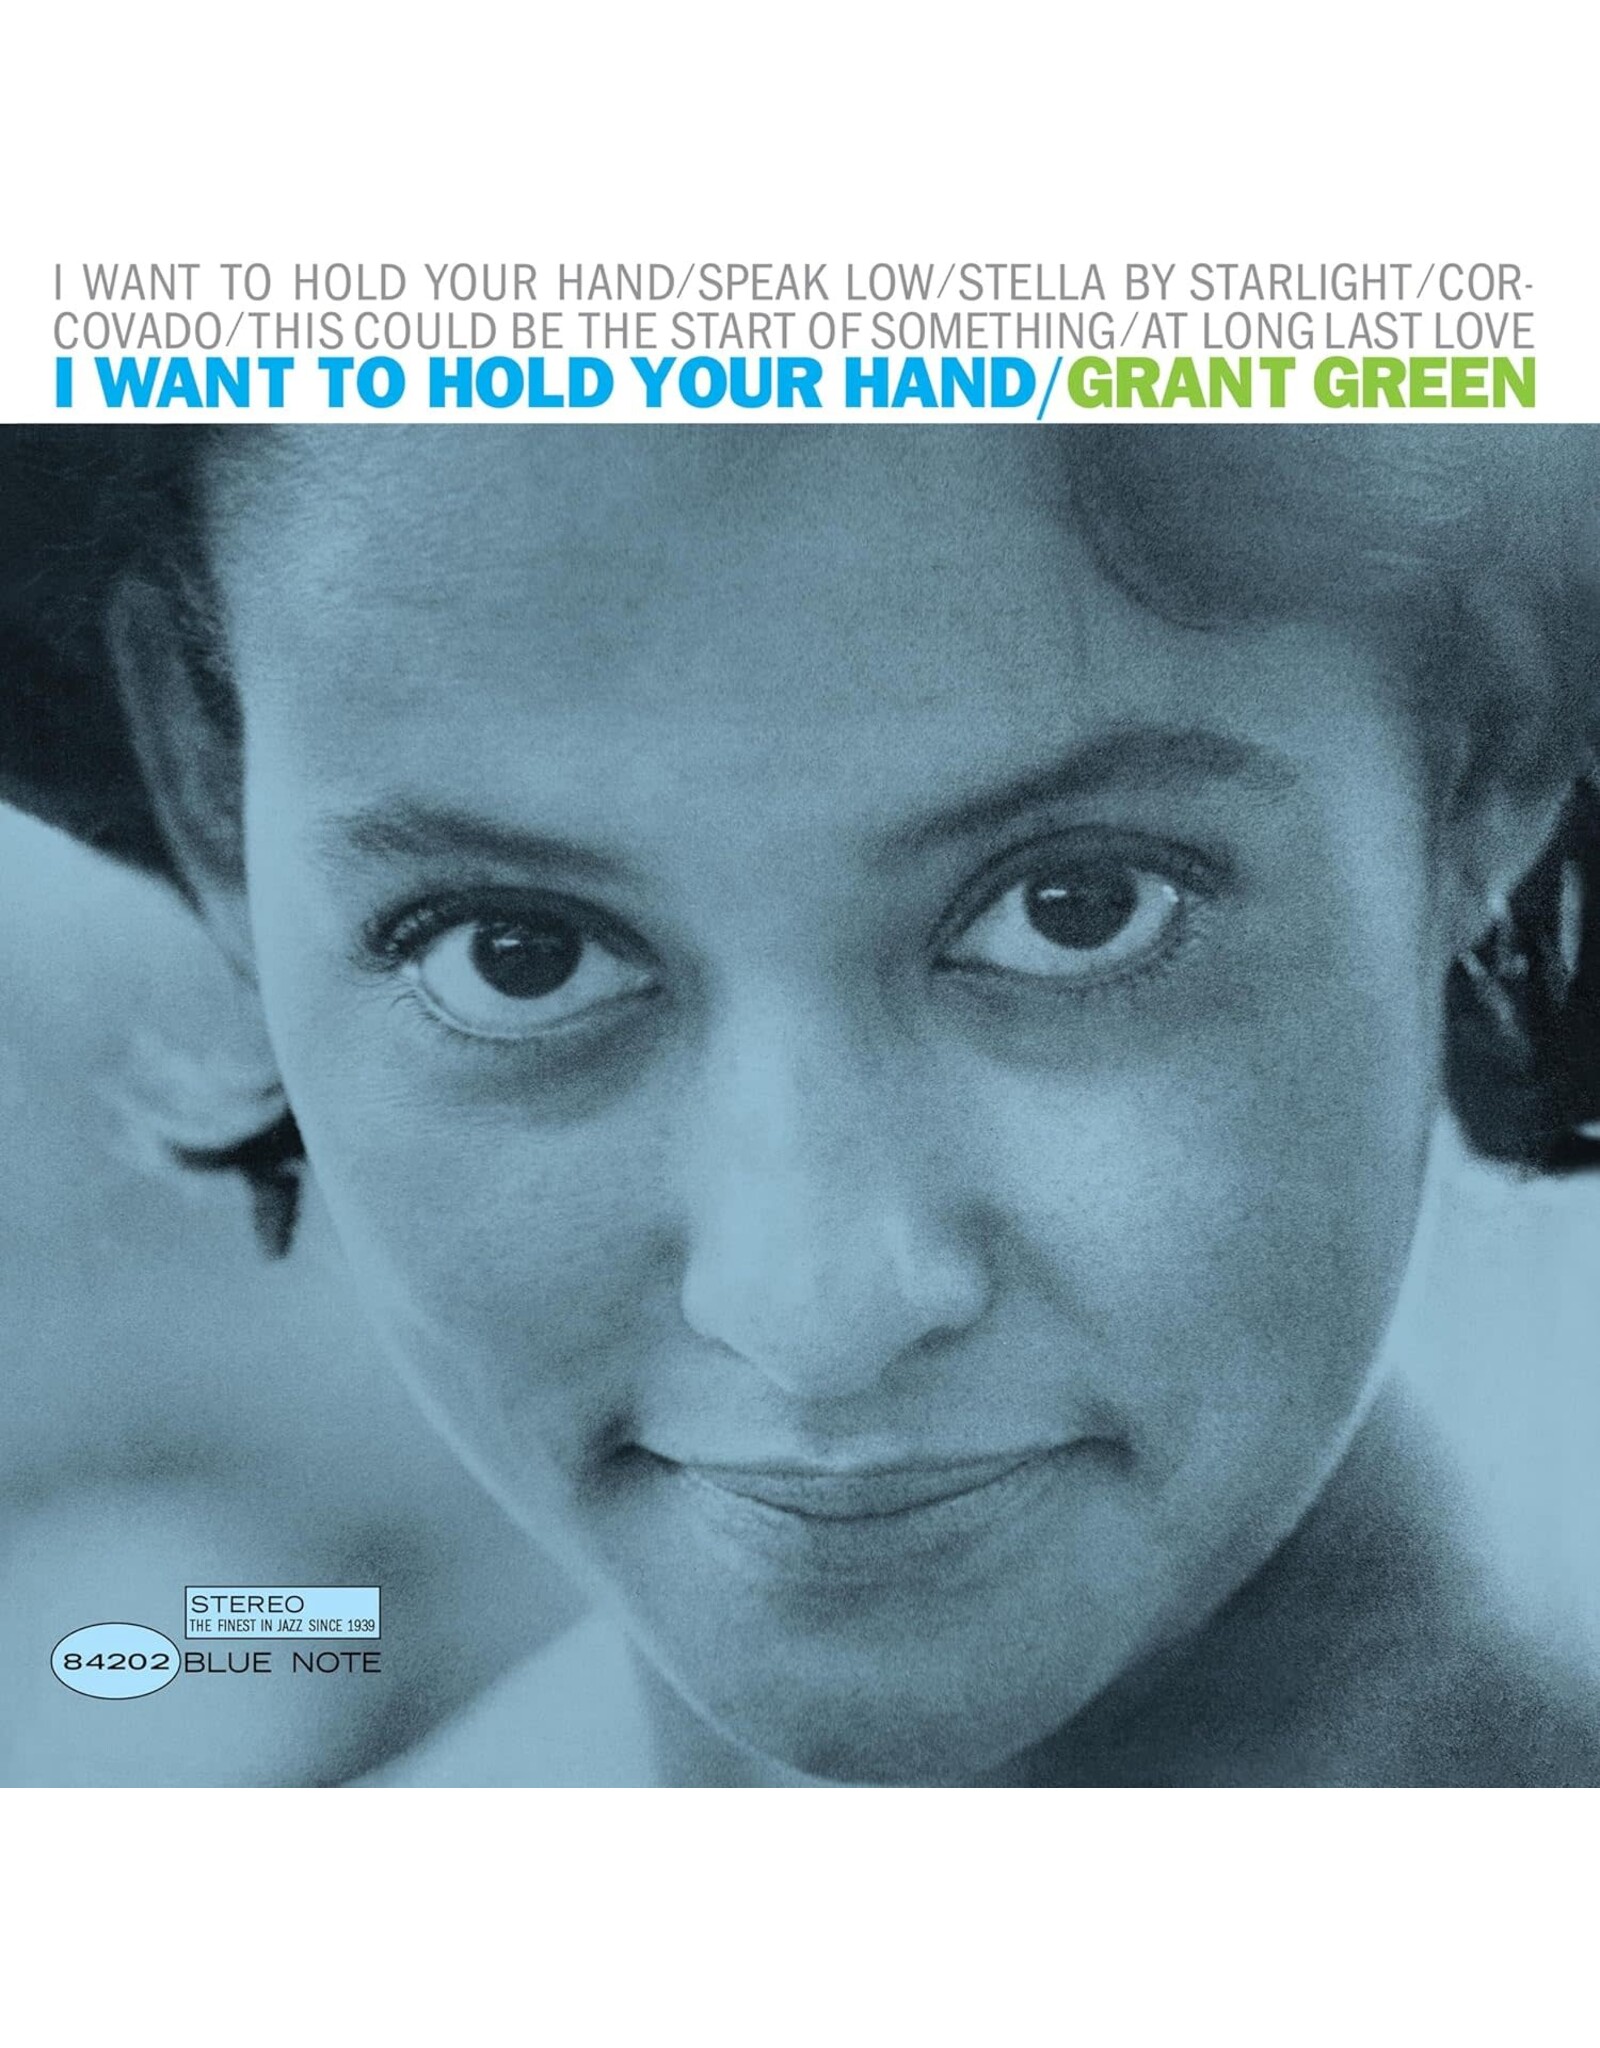 Grant Green - I Want To Hold Your Hand (Blue Note Tone Poet)